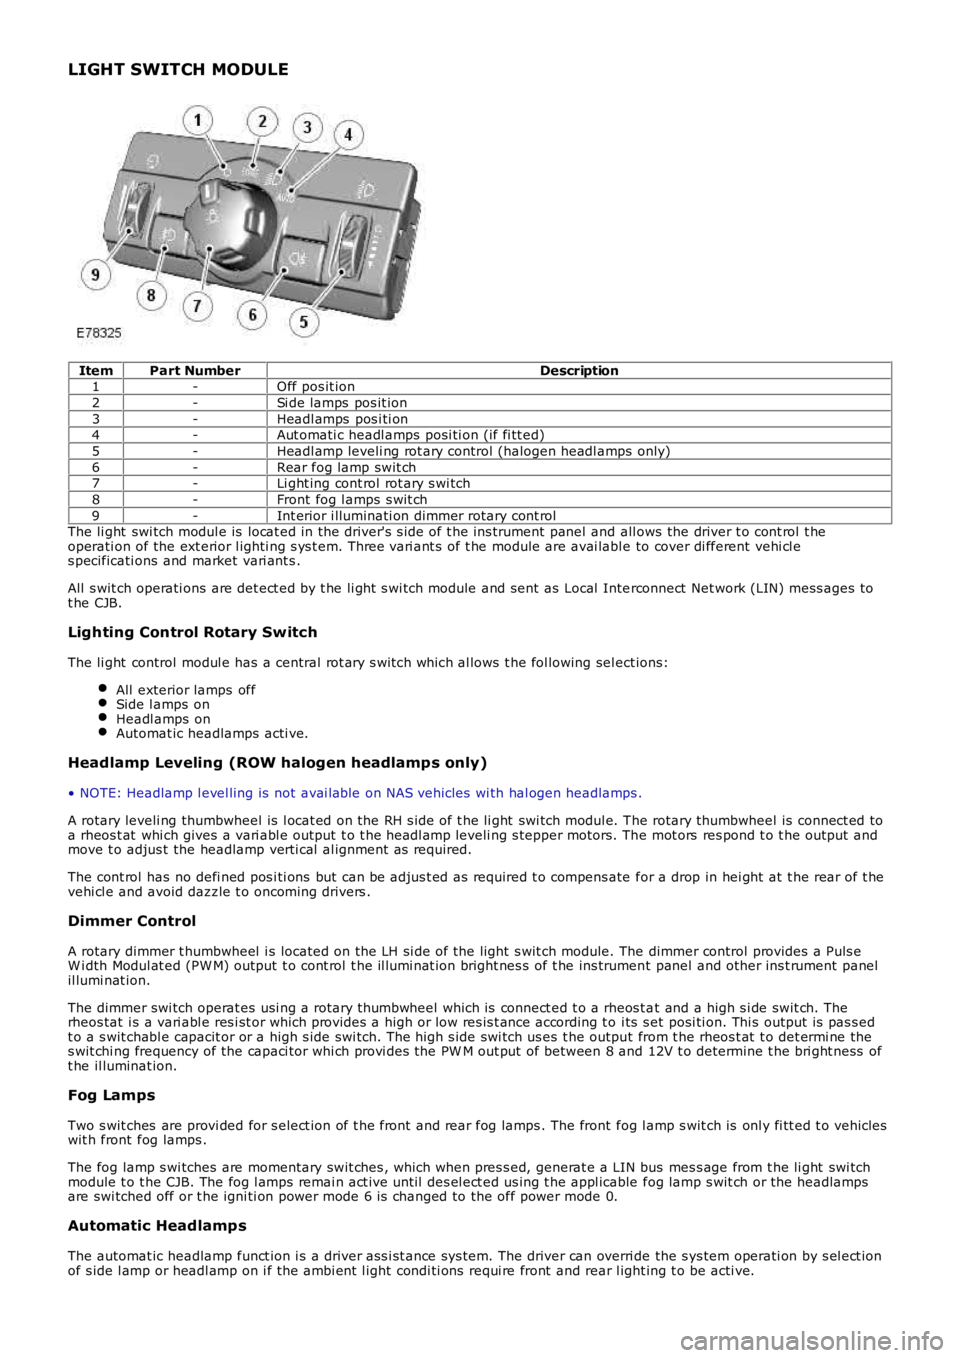 LAND ROVER FRELANDER 2 2006  Repair Manual LIGHT SWITCH MODULE
ItemPart NumberDescription1-Off pos it ion
2-Si de lamps  pos it ion
3-Headl amps  pos i ti on4-Aut omati c headl amps posi ti on (if fi tt ed)
5-Headl amp leveli ng rot ary contro